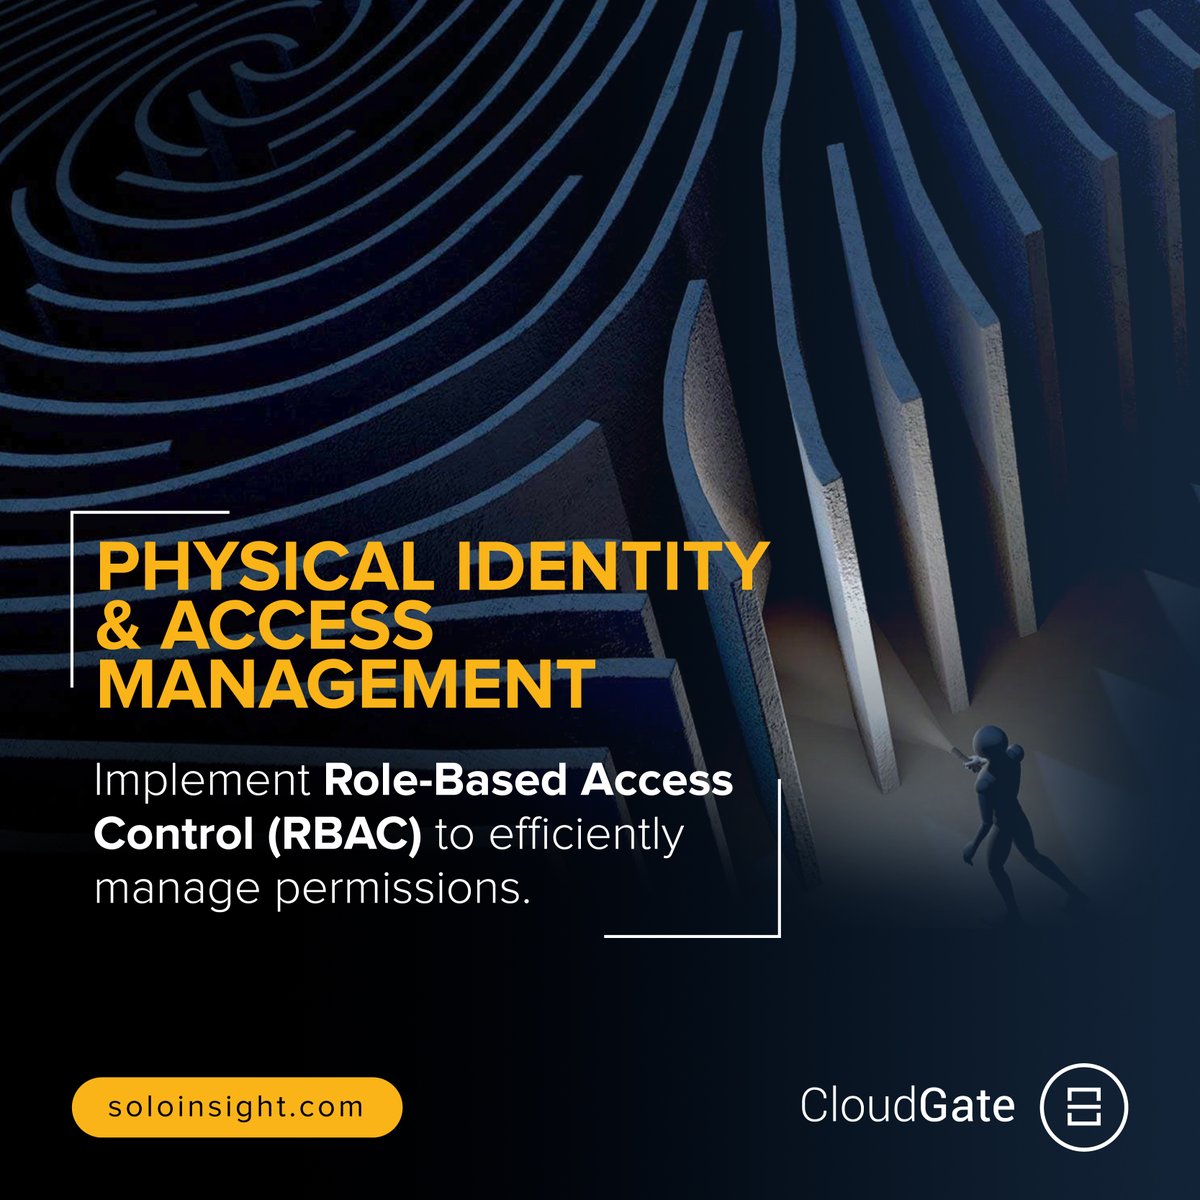 #CloudGate Physical Identity & Access Management (PIAM) platform integrates role and policy-based #AccessControl, enabling organizations to assign access privileges, enforce restrictions, and streamline access management.
#PhysicalSecurity #WorkflowAutomation #WorkplaceExperience